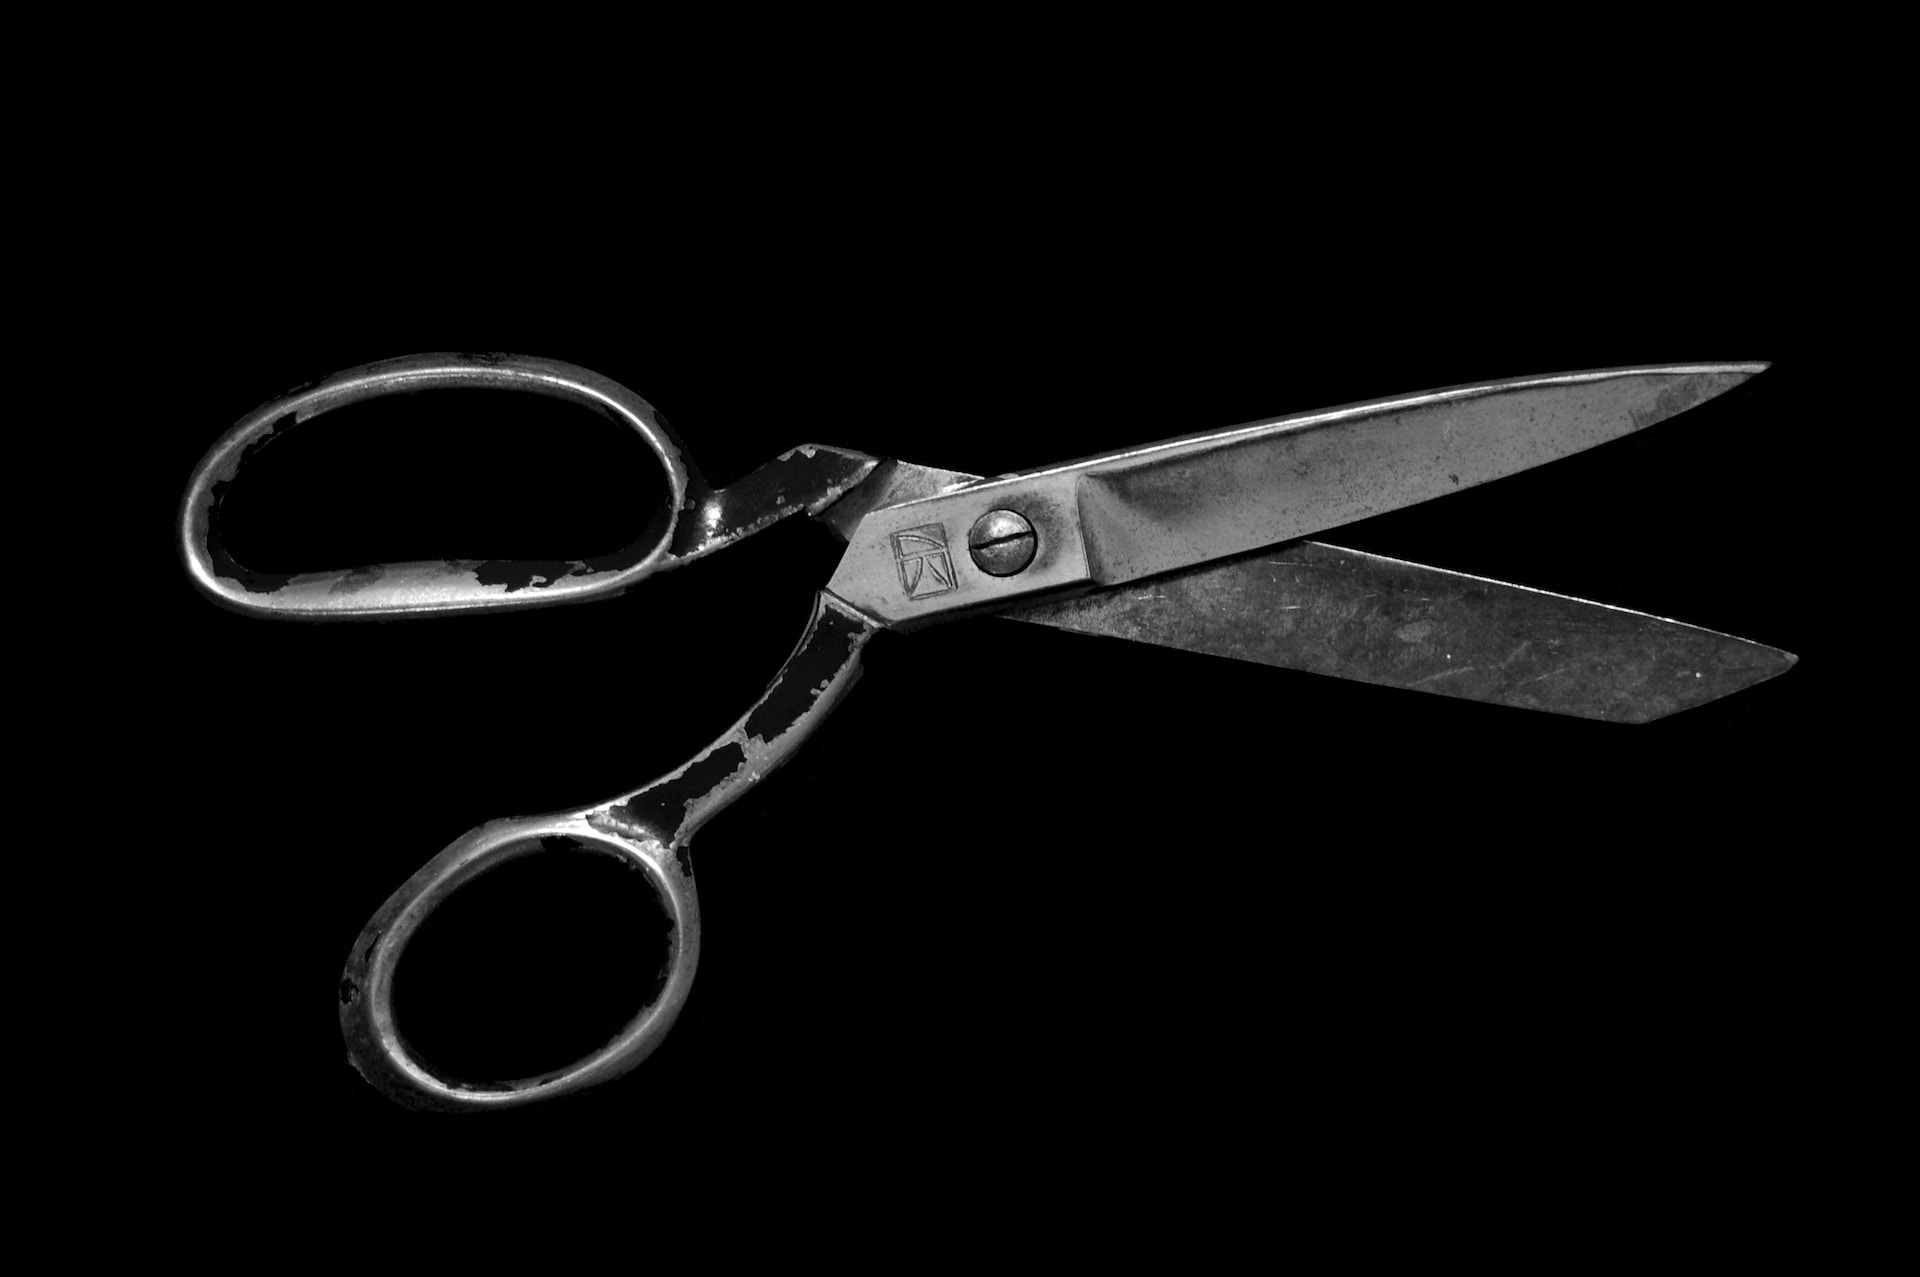 Image shows scissors to illustrate the idea that a book editor will cut words from your manuscript.